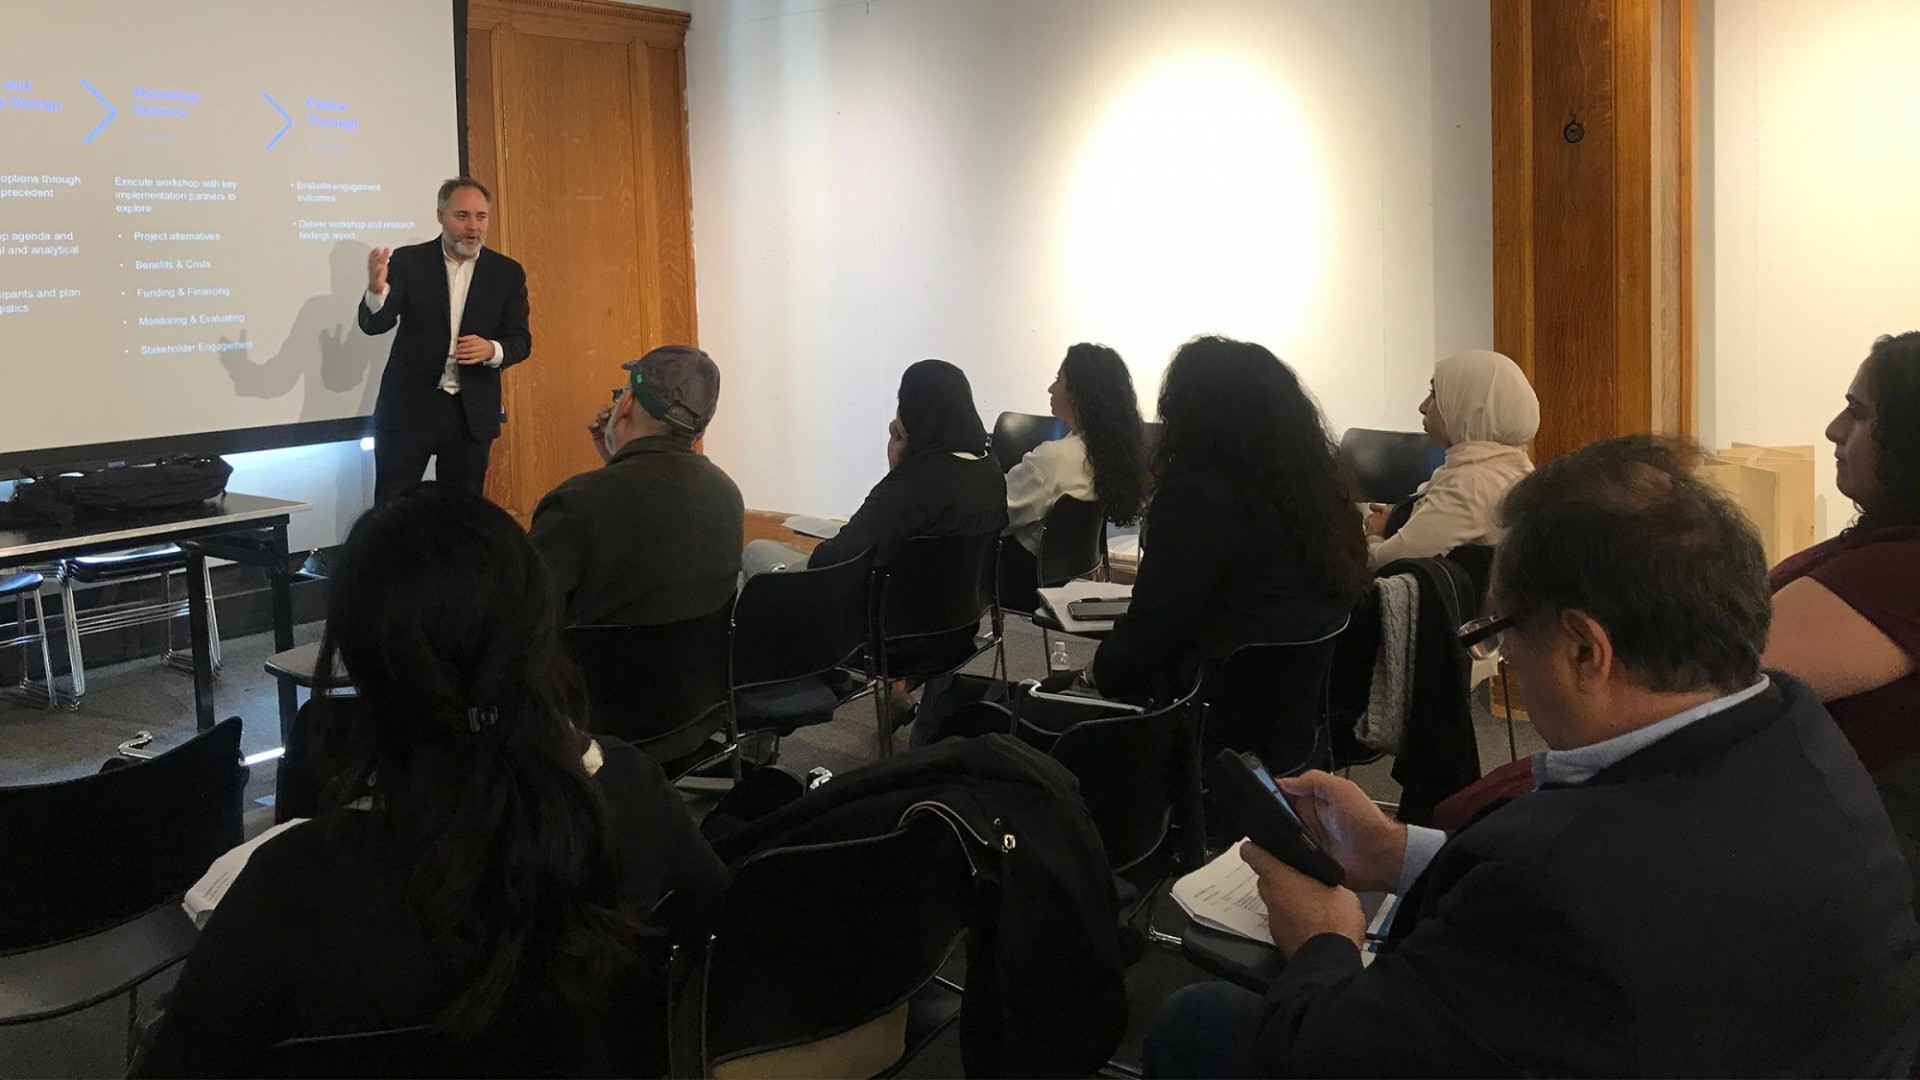 Thaddeus Pawlowski presenting to representatives from the U.S. Department of State (DOS) from various countries in the Middle East.